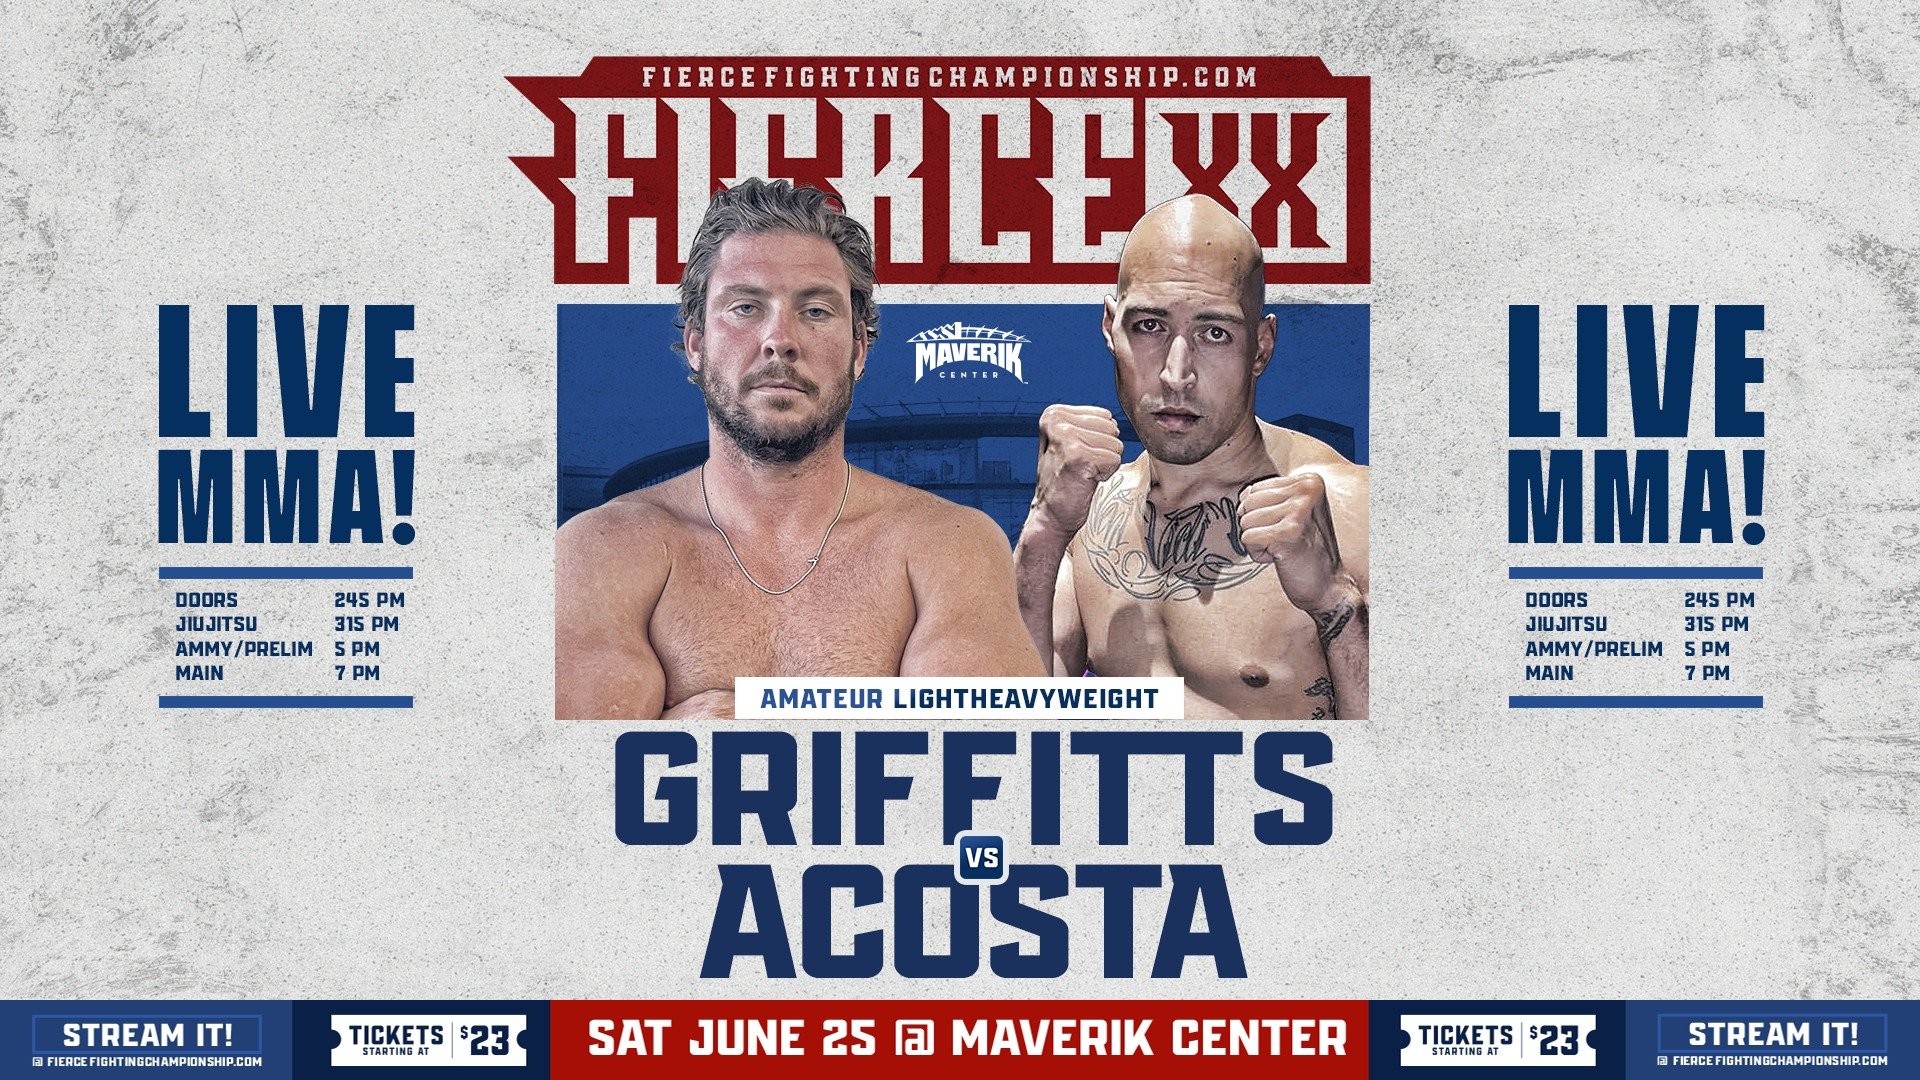 Anthony Acosta vs Kyle Griffitts - Fierce Fighting Championship 20